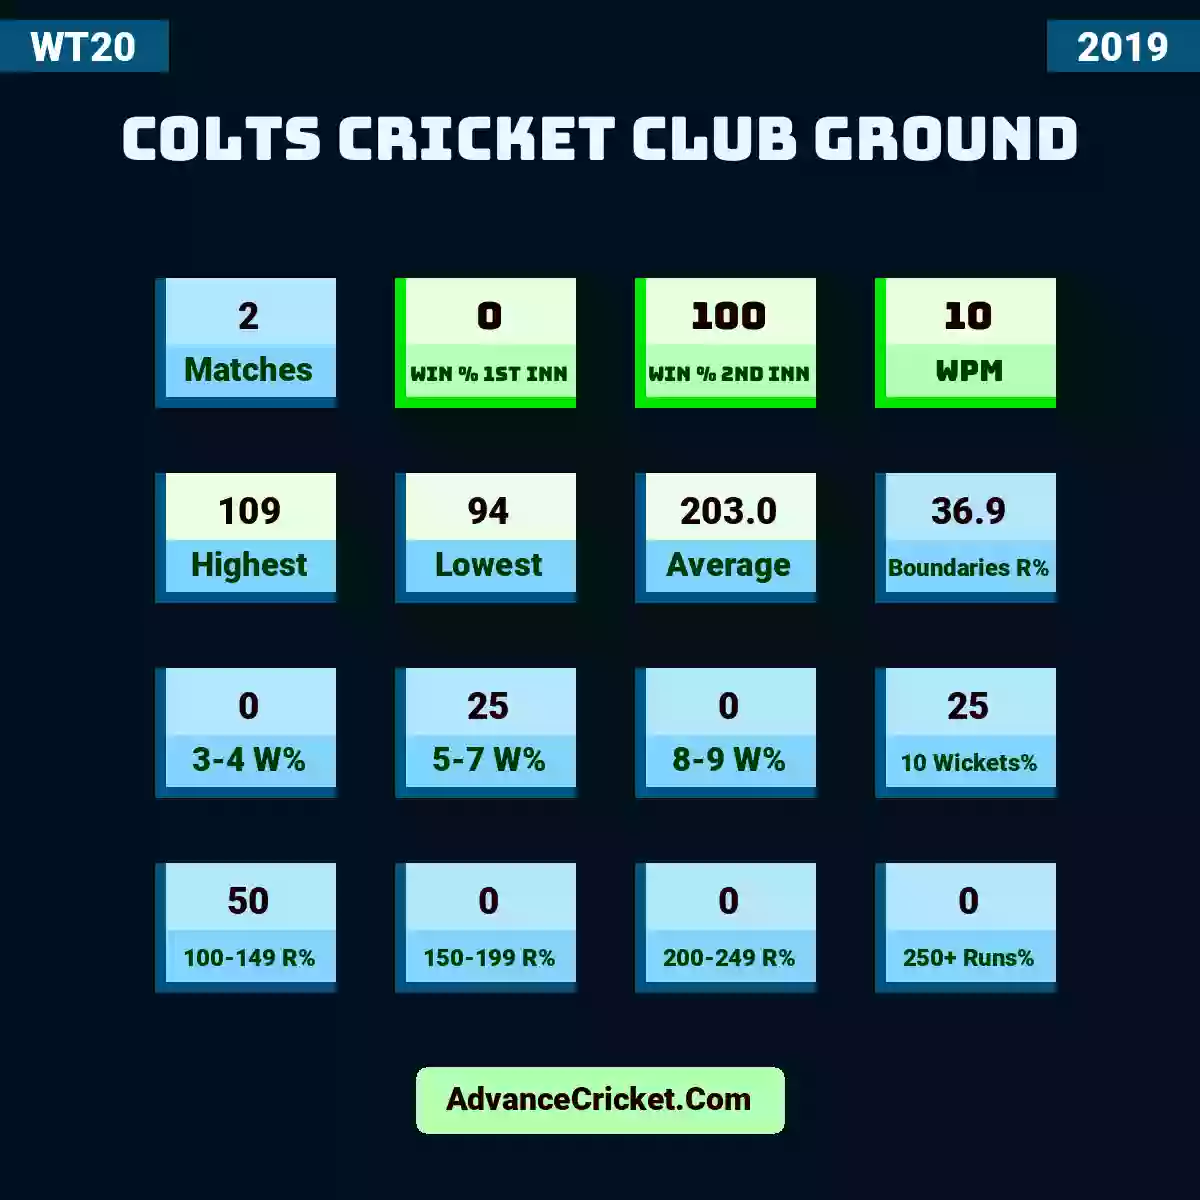 Image showing Colts Cricket Club Ground with Matches: 2, Win % 1st Inn: 0, Win % 2nd Inn: 100, WPM: 10, Highest: 109, Lowest: 94, Average: 203.0, Boundaries R%: 36.9, 3-4 W%: 0, 5-7 W%: 25, 8-9 W%: 0, 10 Wickets%: 25, 100-149 R%: 50, 150-199 R%: 0, 200-249 R%: 0, 250+ Runs%: 0.